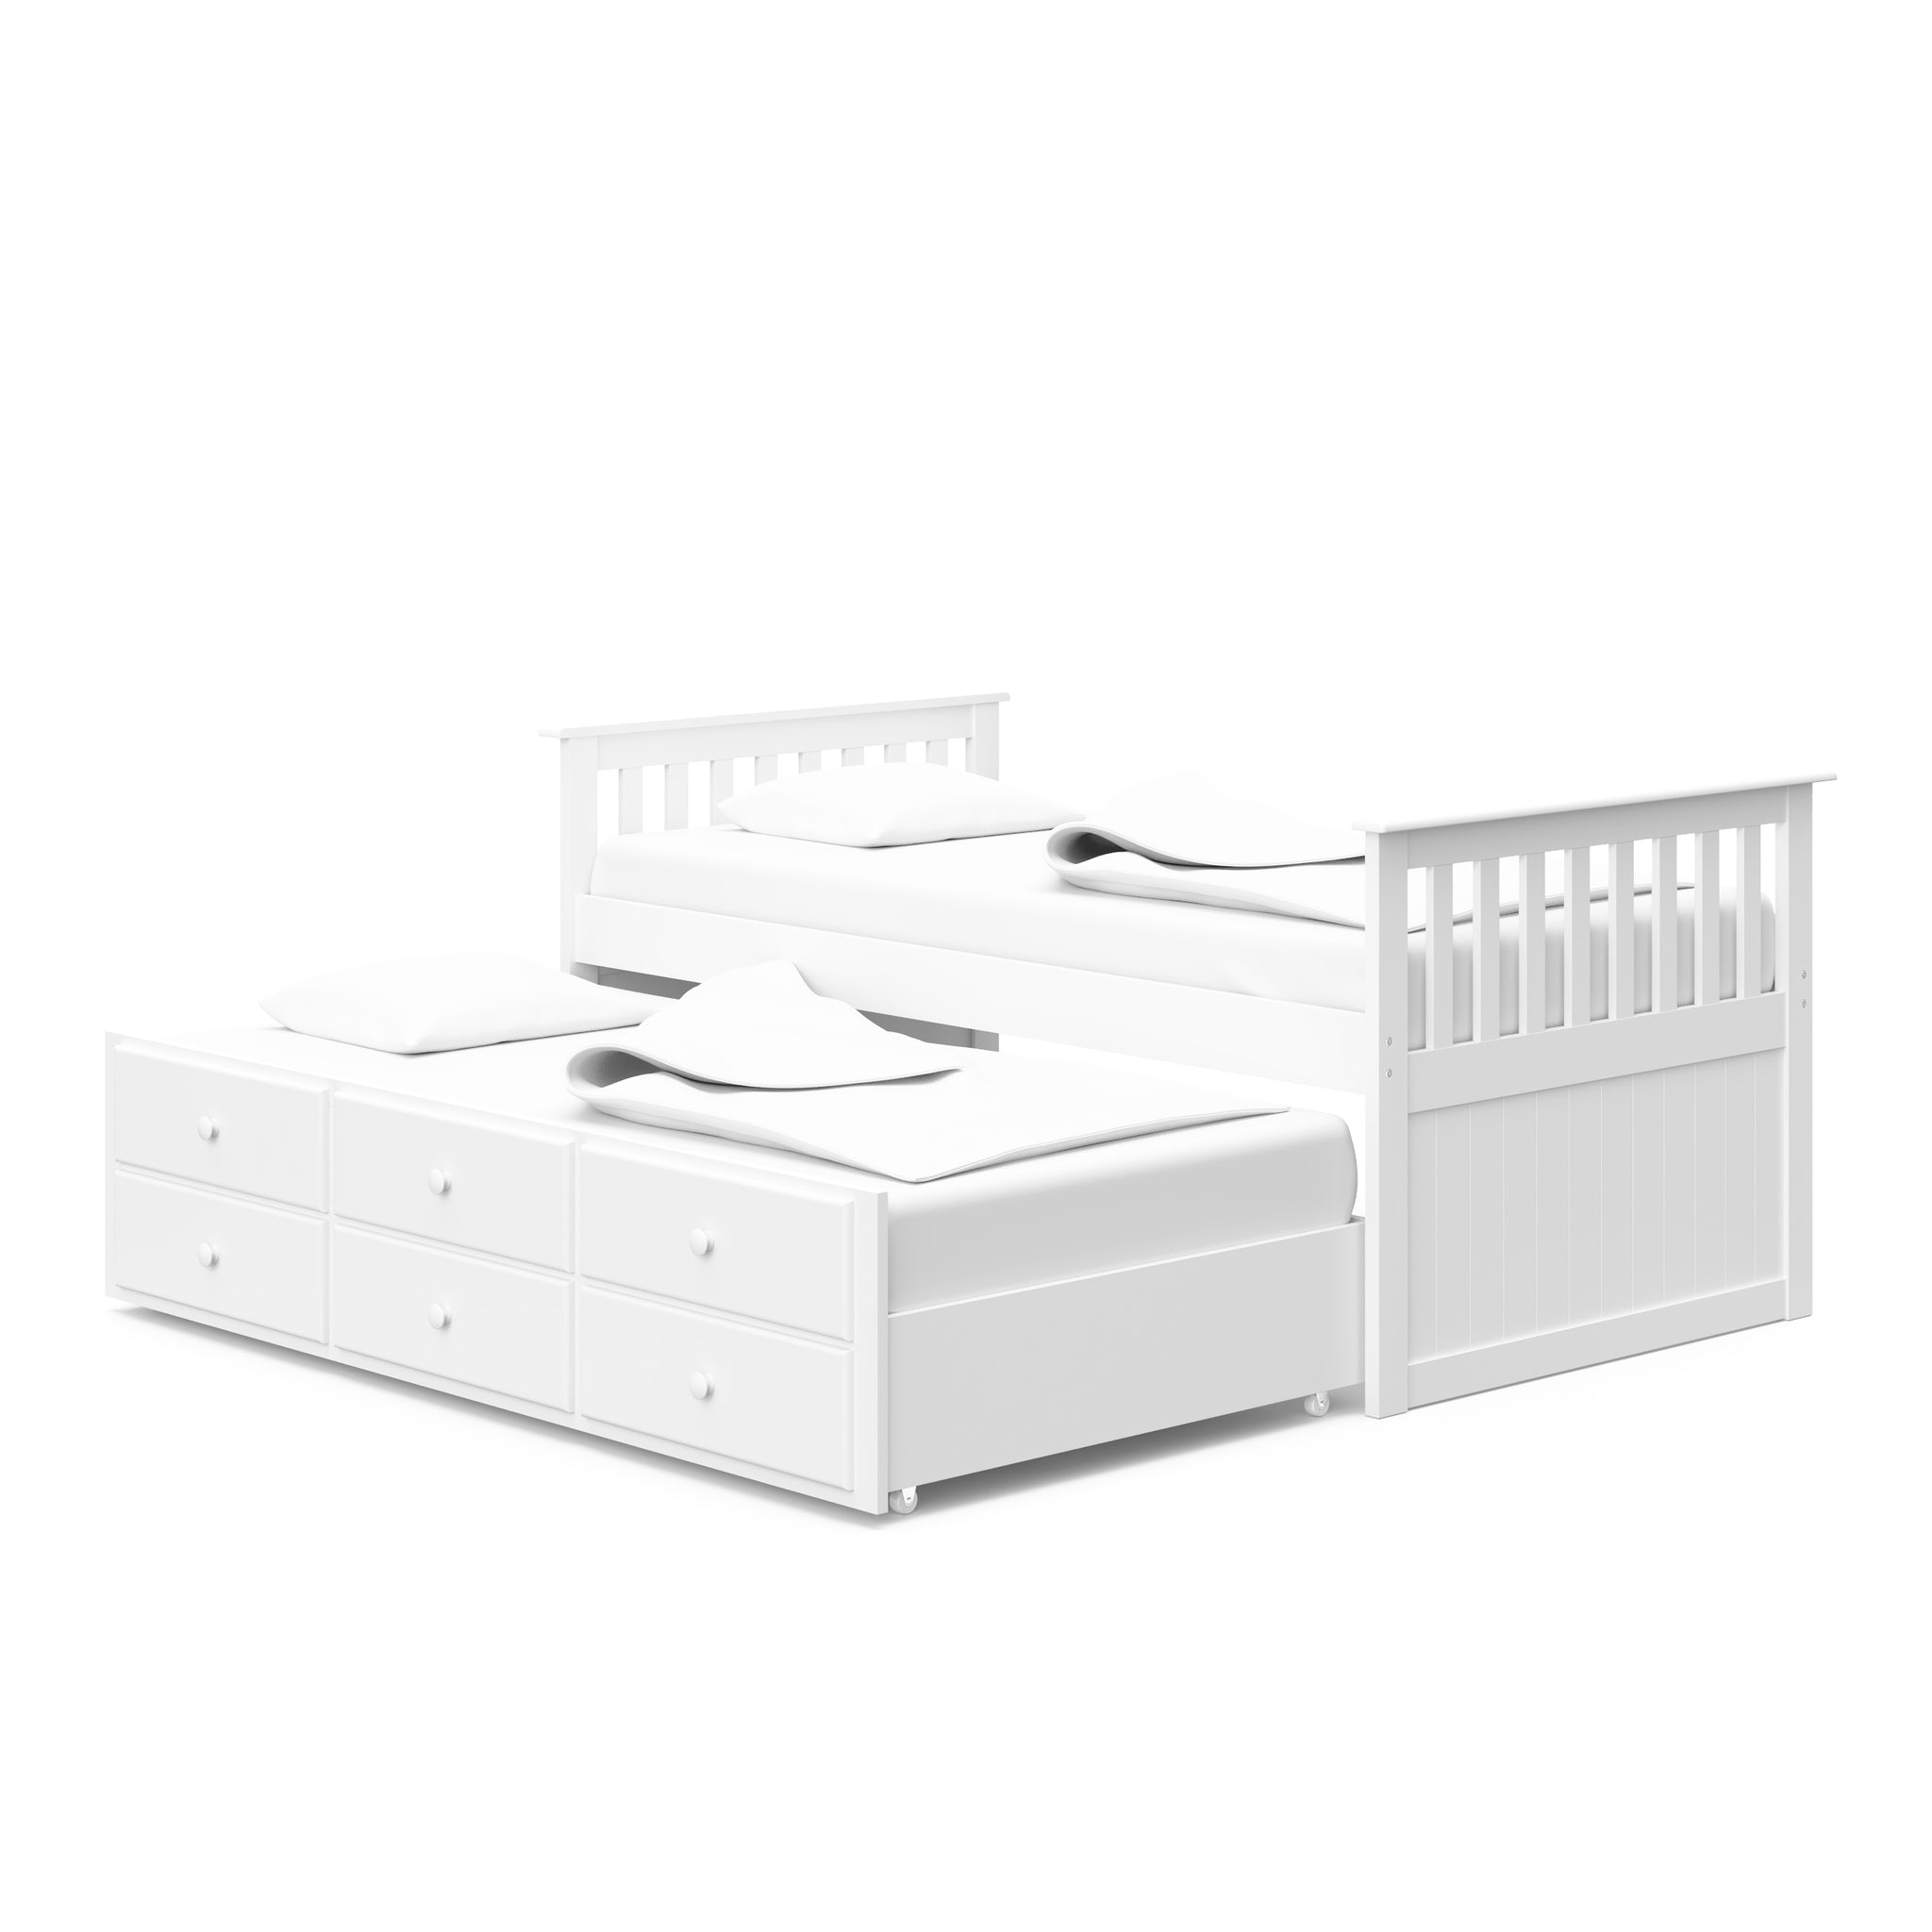 White twin size captains bed with open trundle and drawers angled